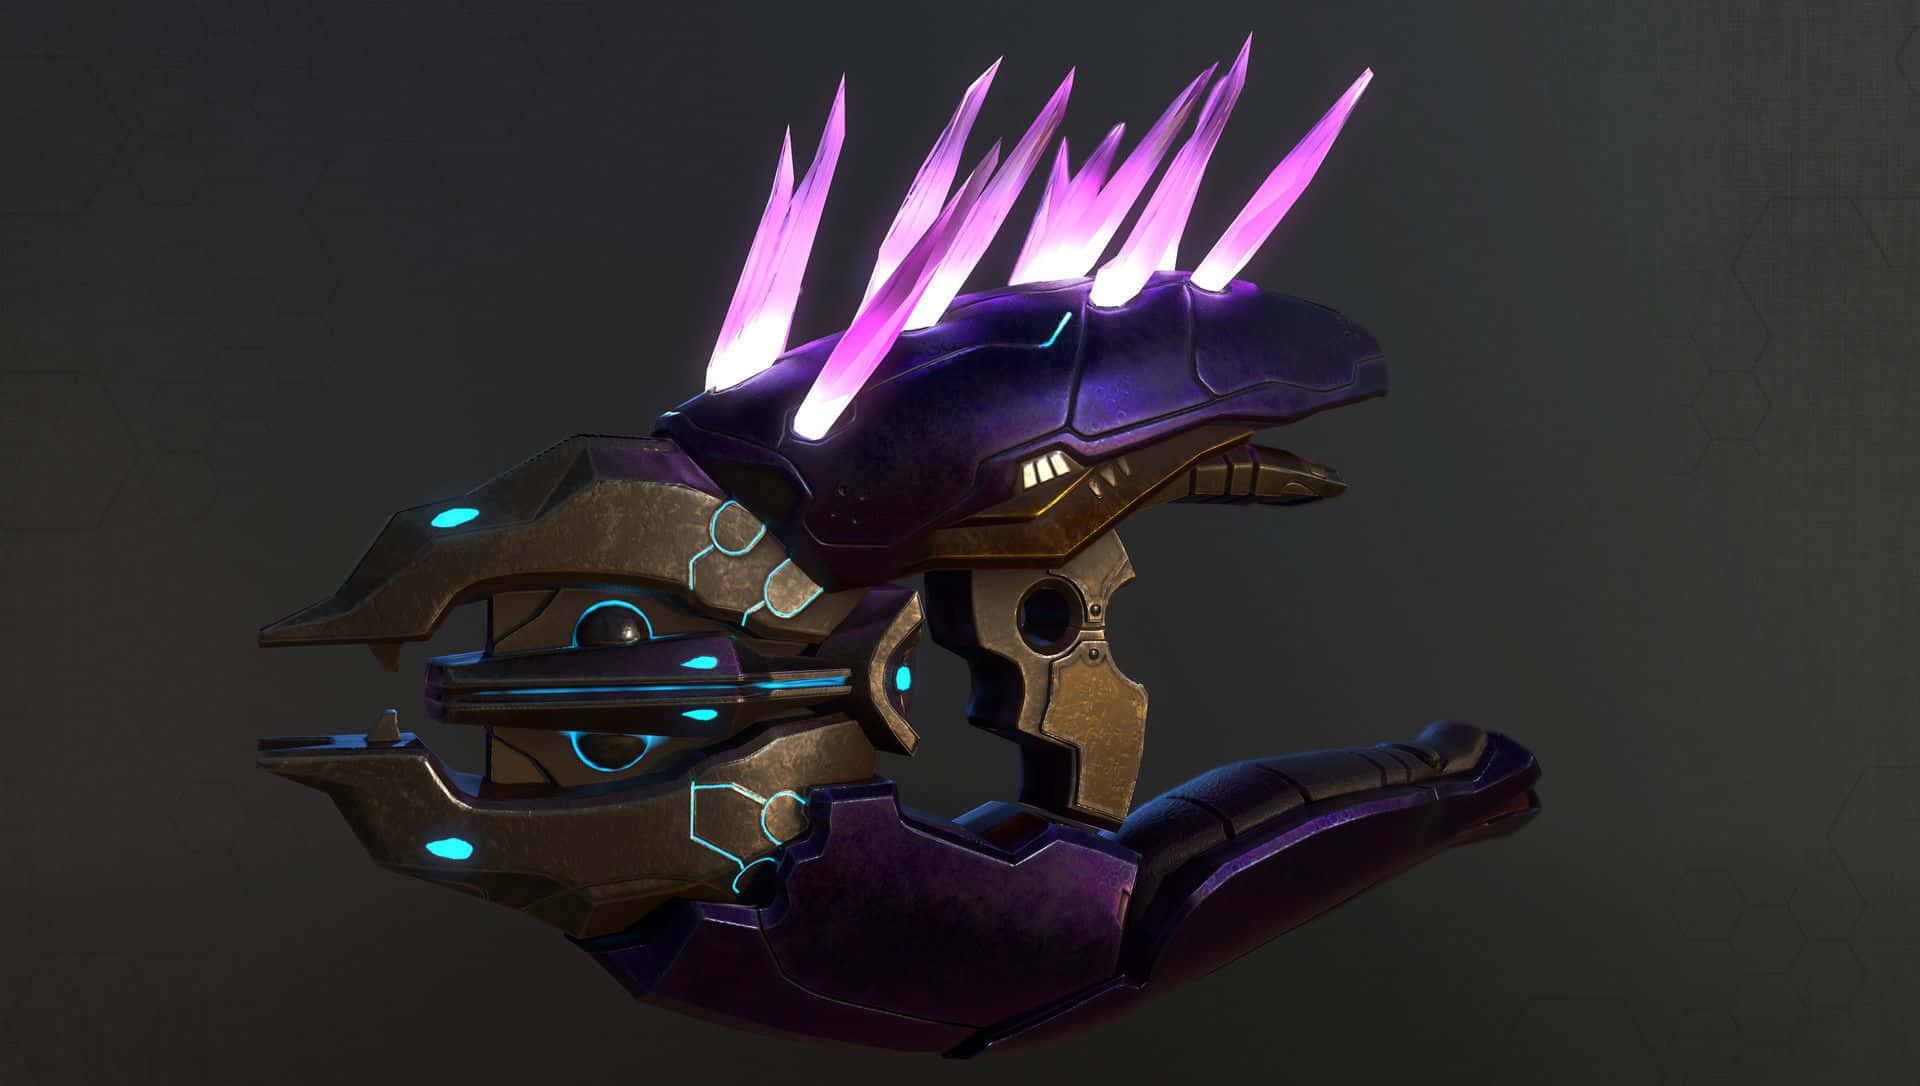 Halo Needler weapon in action Wallpaper